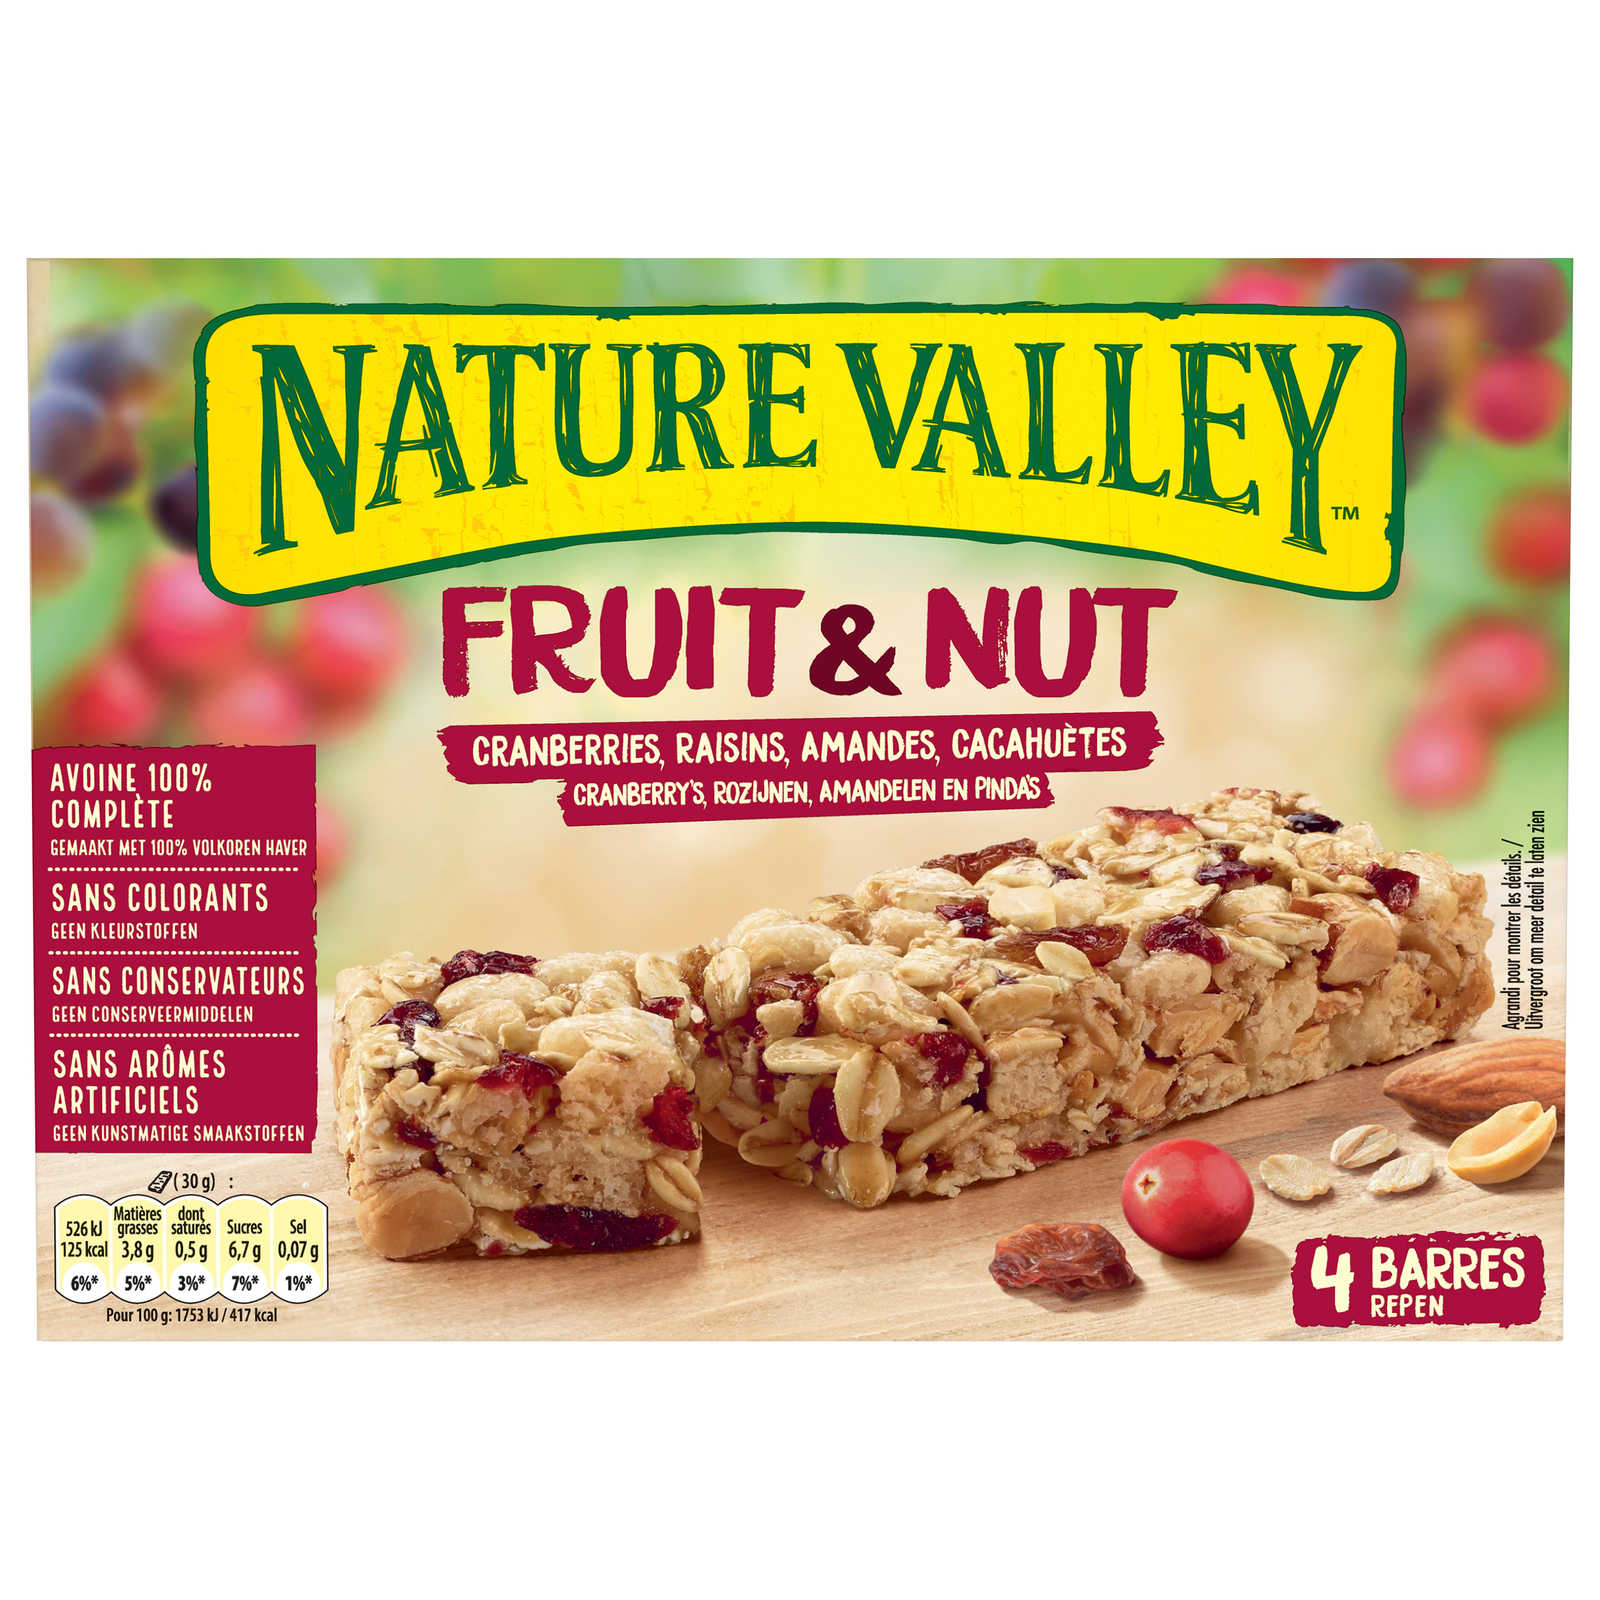 Nature valley-Fruit & Nut